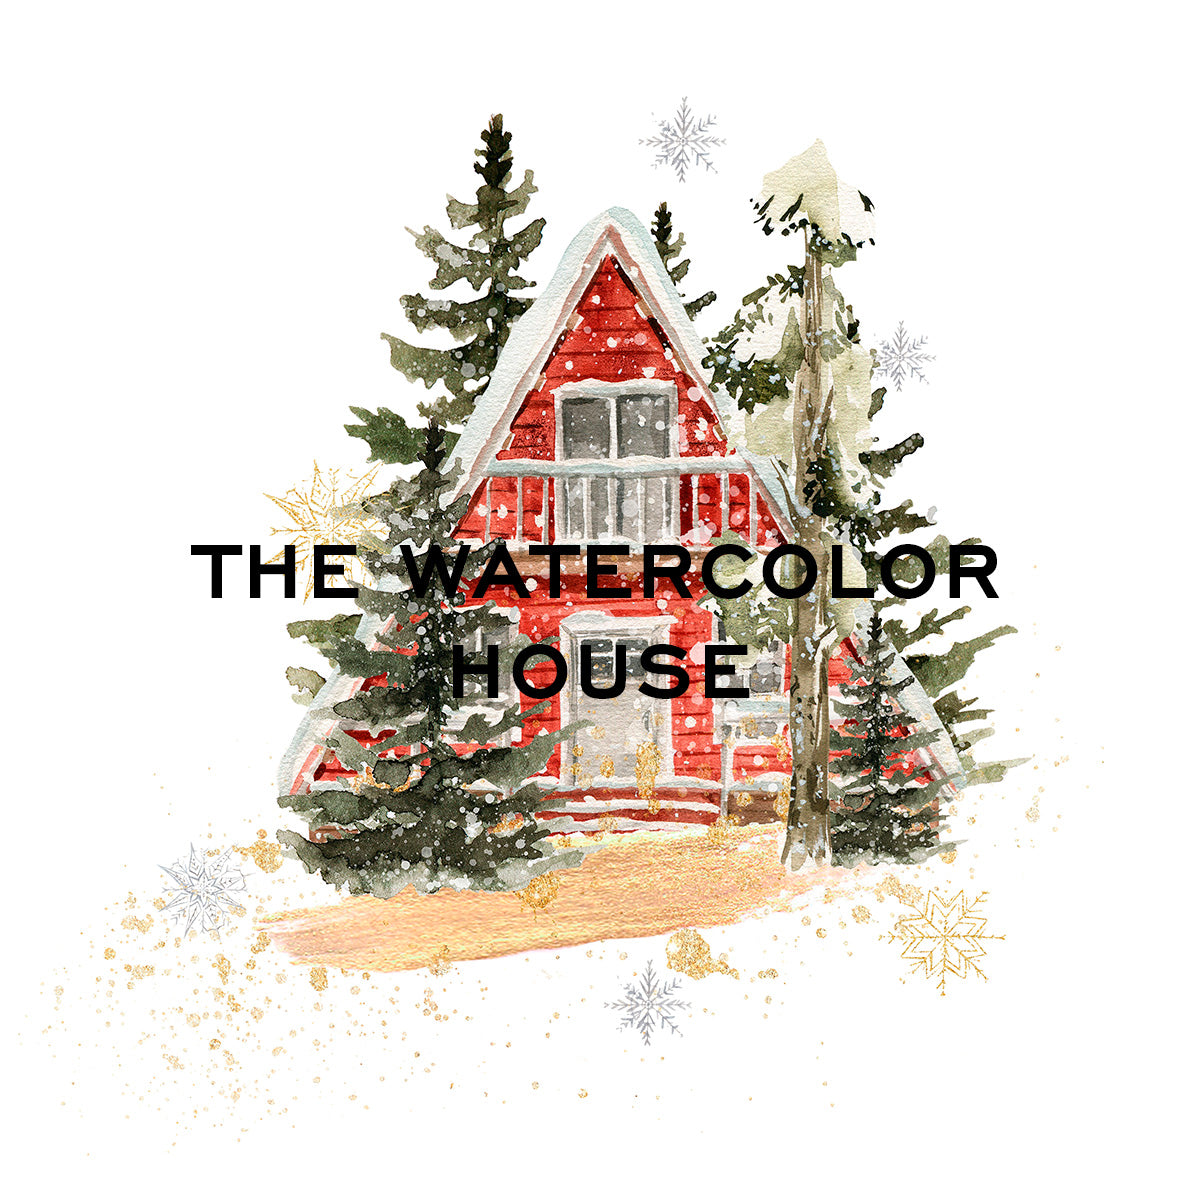 The Watercolor House